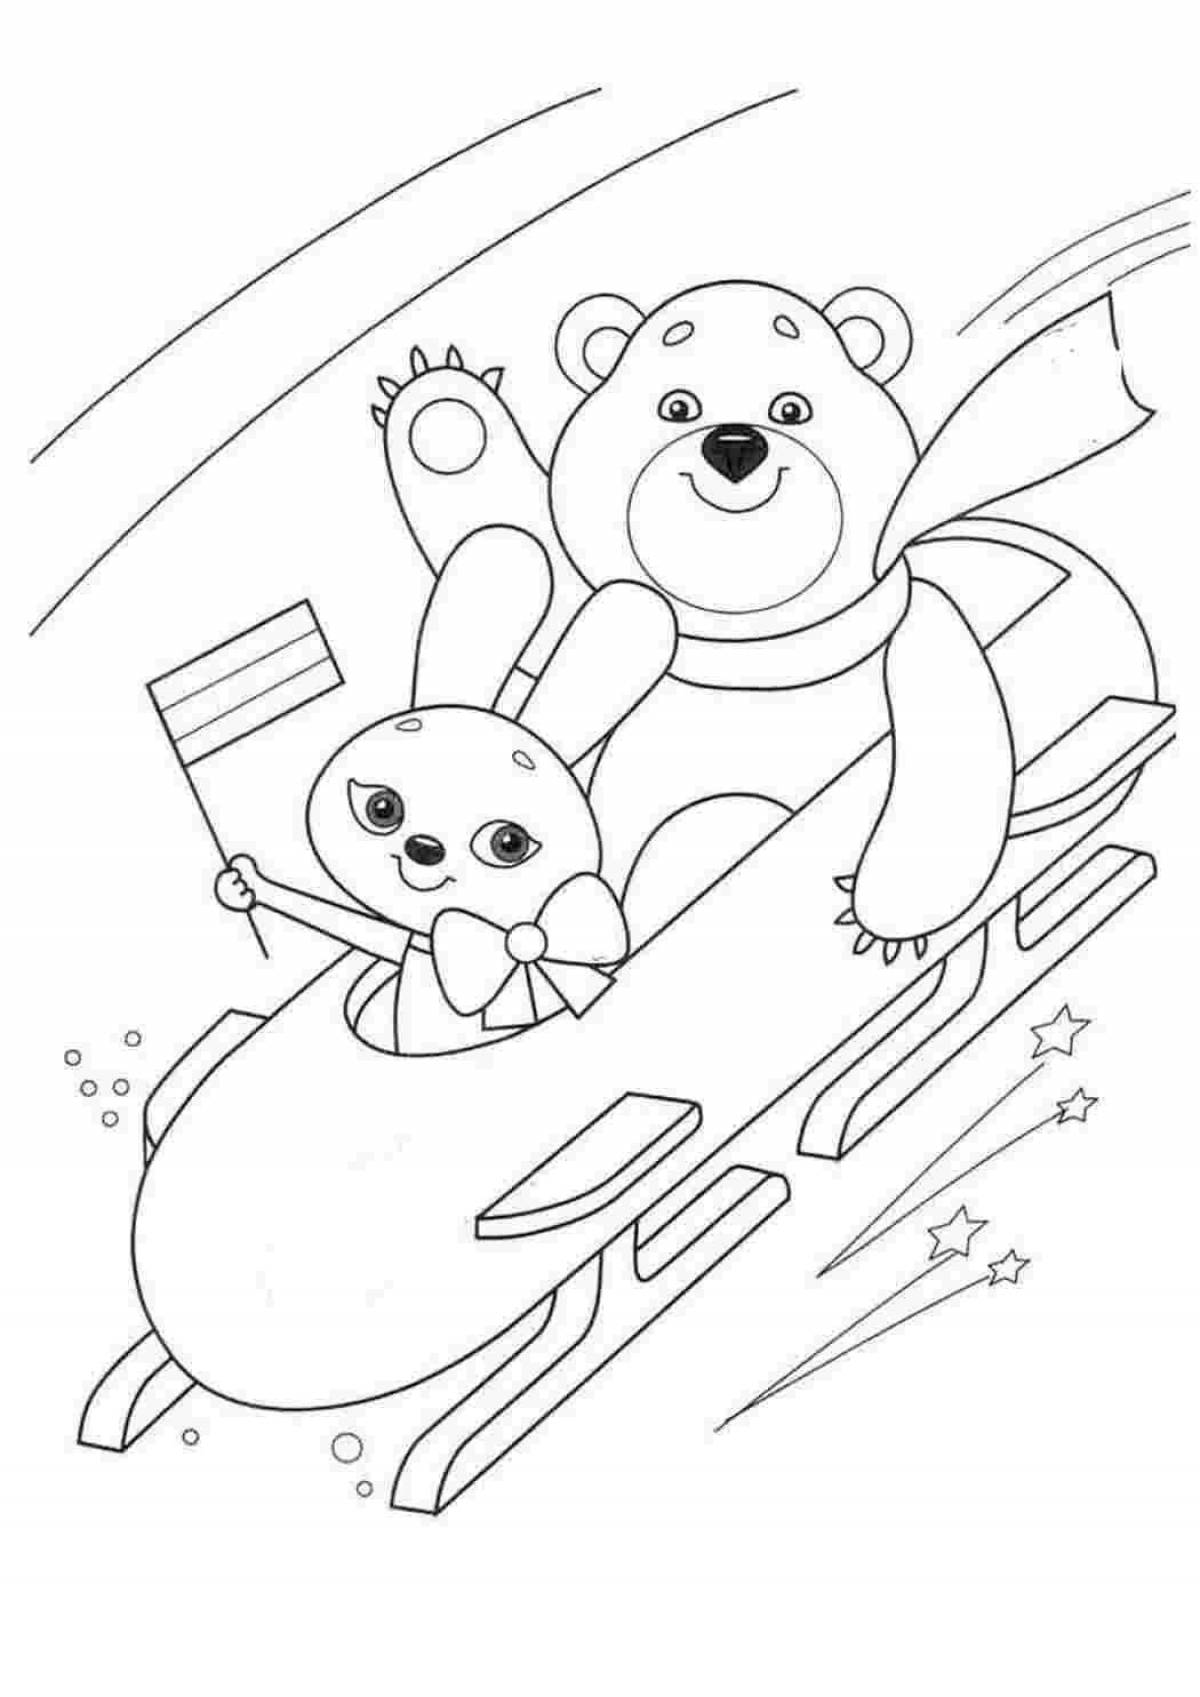 Coloring playful bear on skis